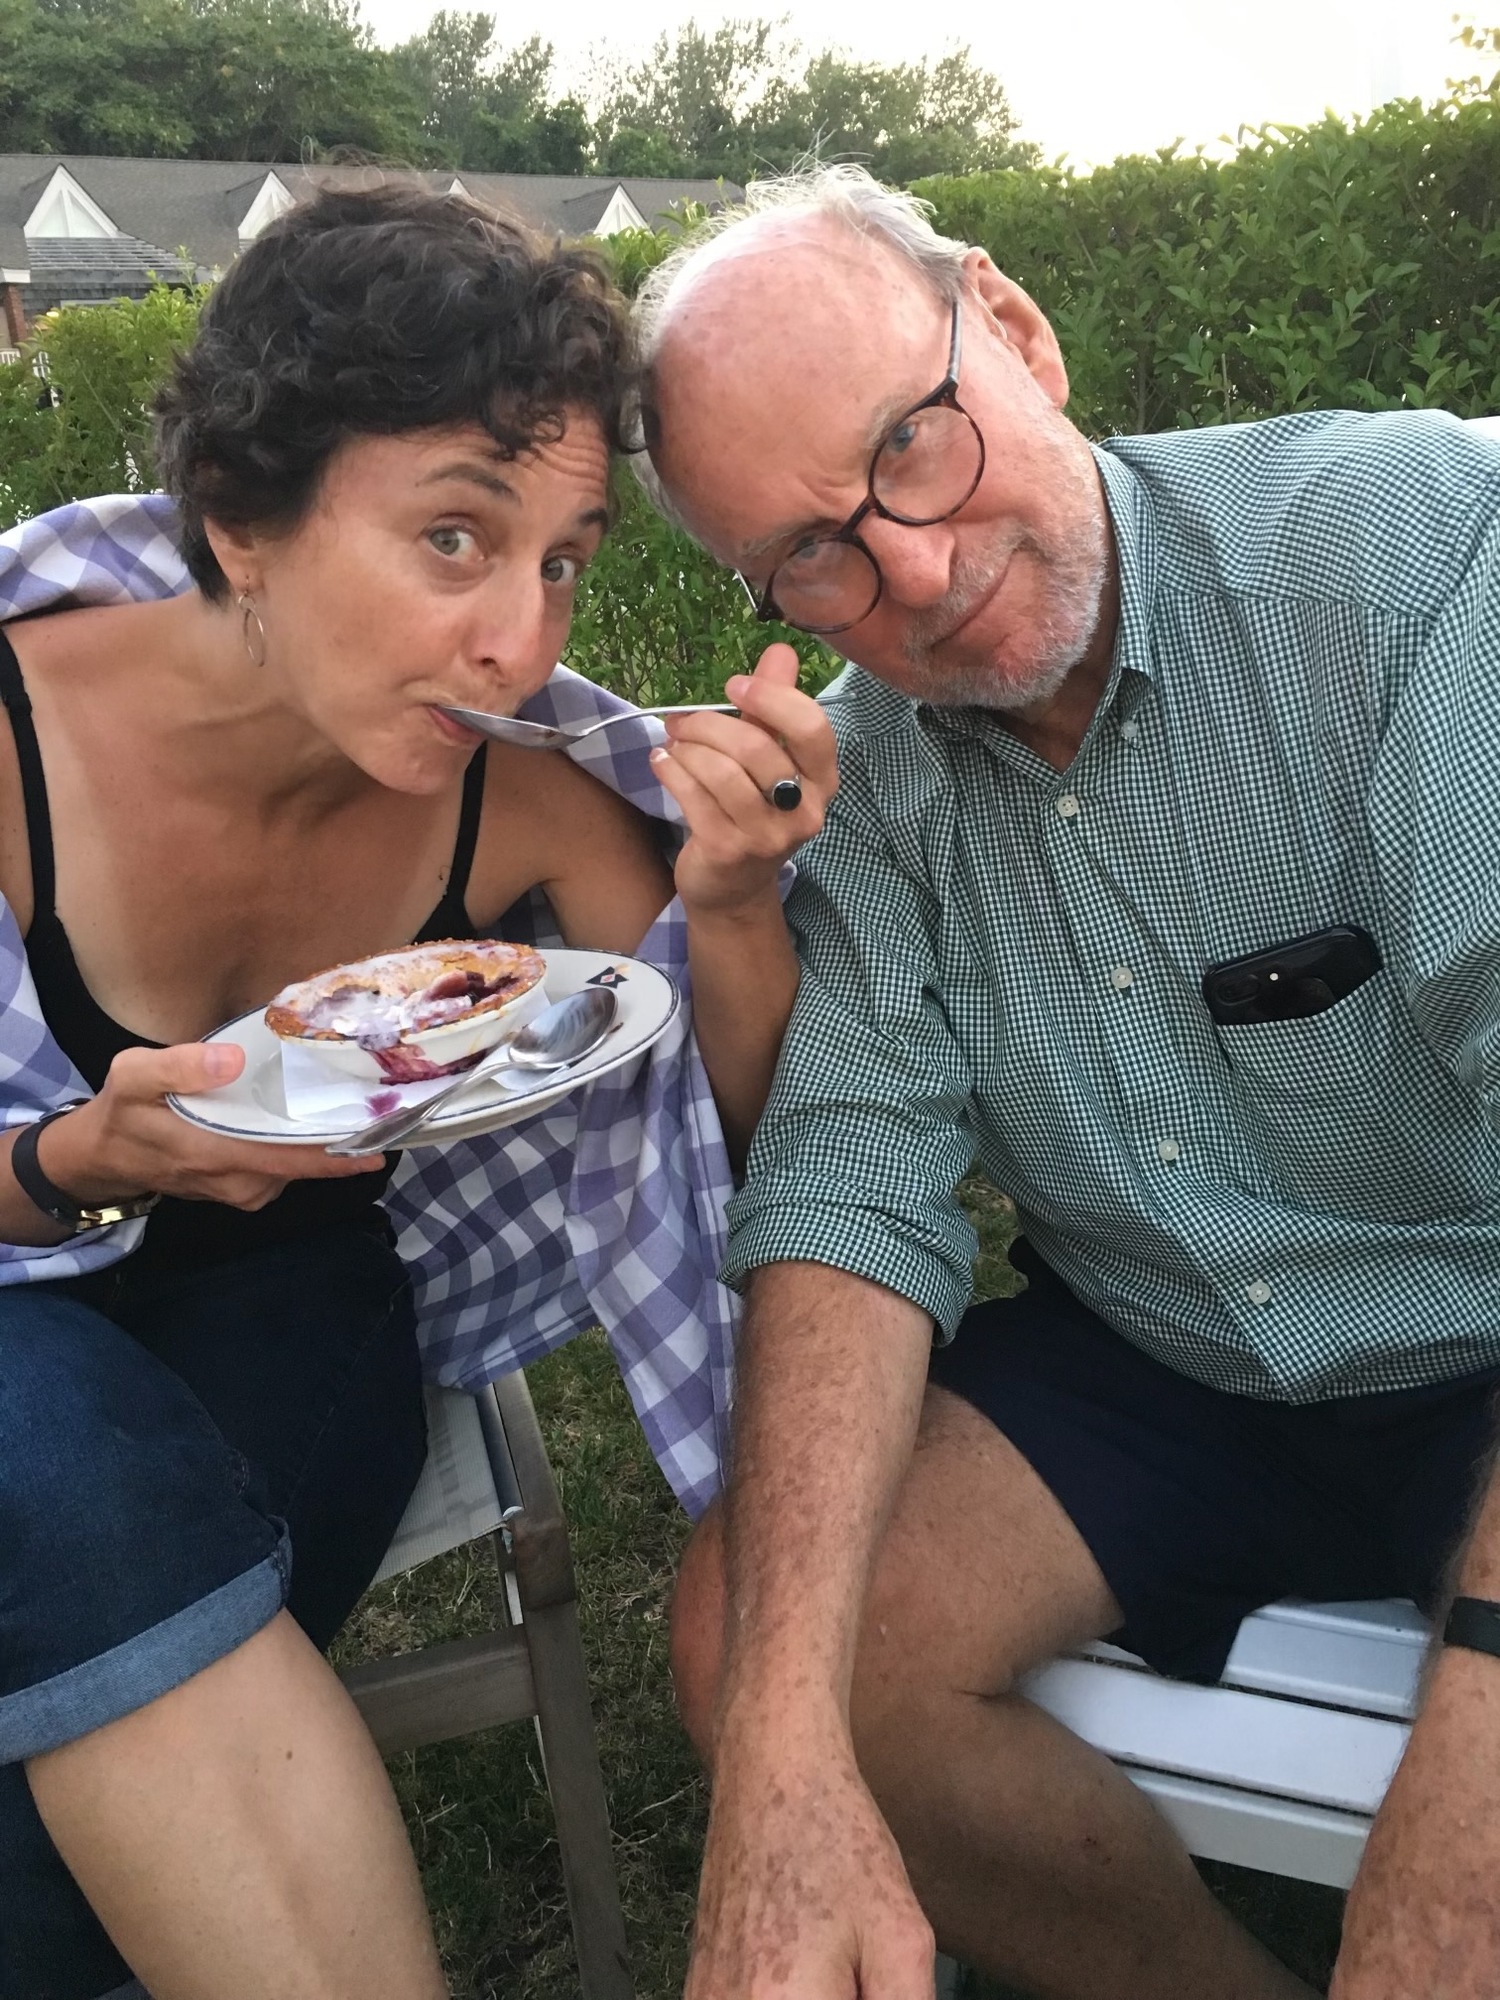 Jim Marquardt and his daughter, Julie, share a slice of pie at Baron's Cove in Sag Harbor. COURTESY JULIE MARQUARDT